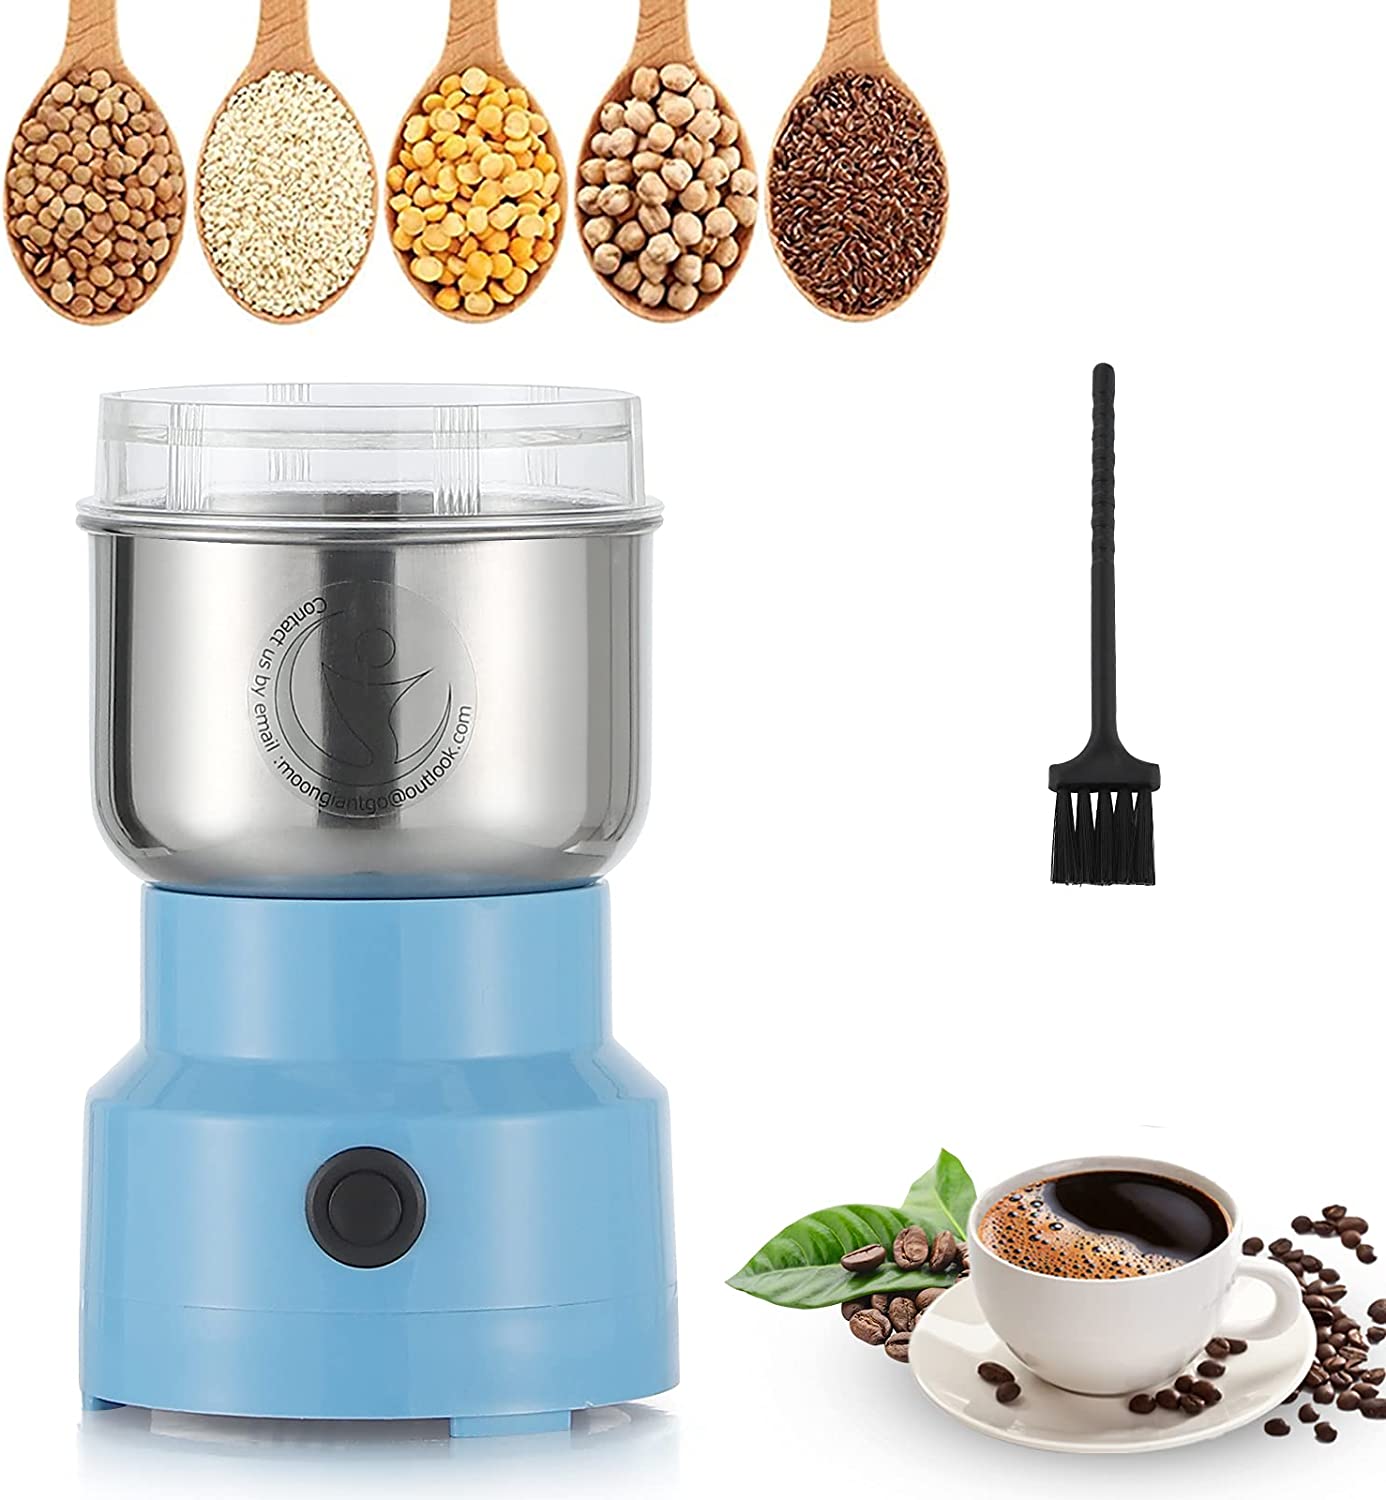 Moongiantgo Grain Mill Multifunctional 400 W 35000 rpm Spice Mill Ultra Fine Coffee Grinder, 300 ml Capacity, Stainless Steel, Transparent Lid, for Dry Materials, Spices, Herbs, Coffee (Blue)